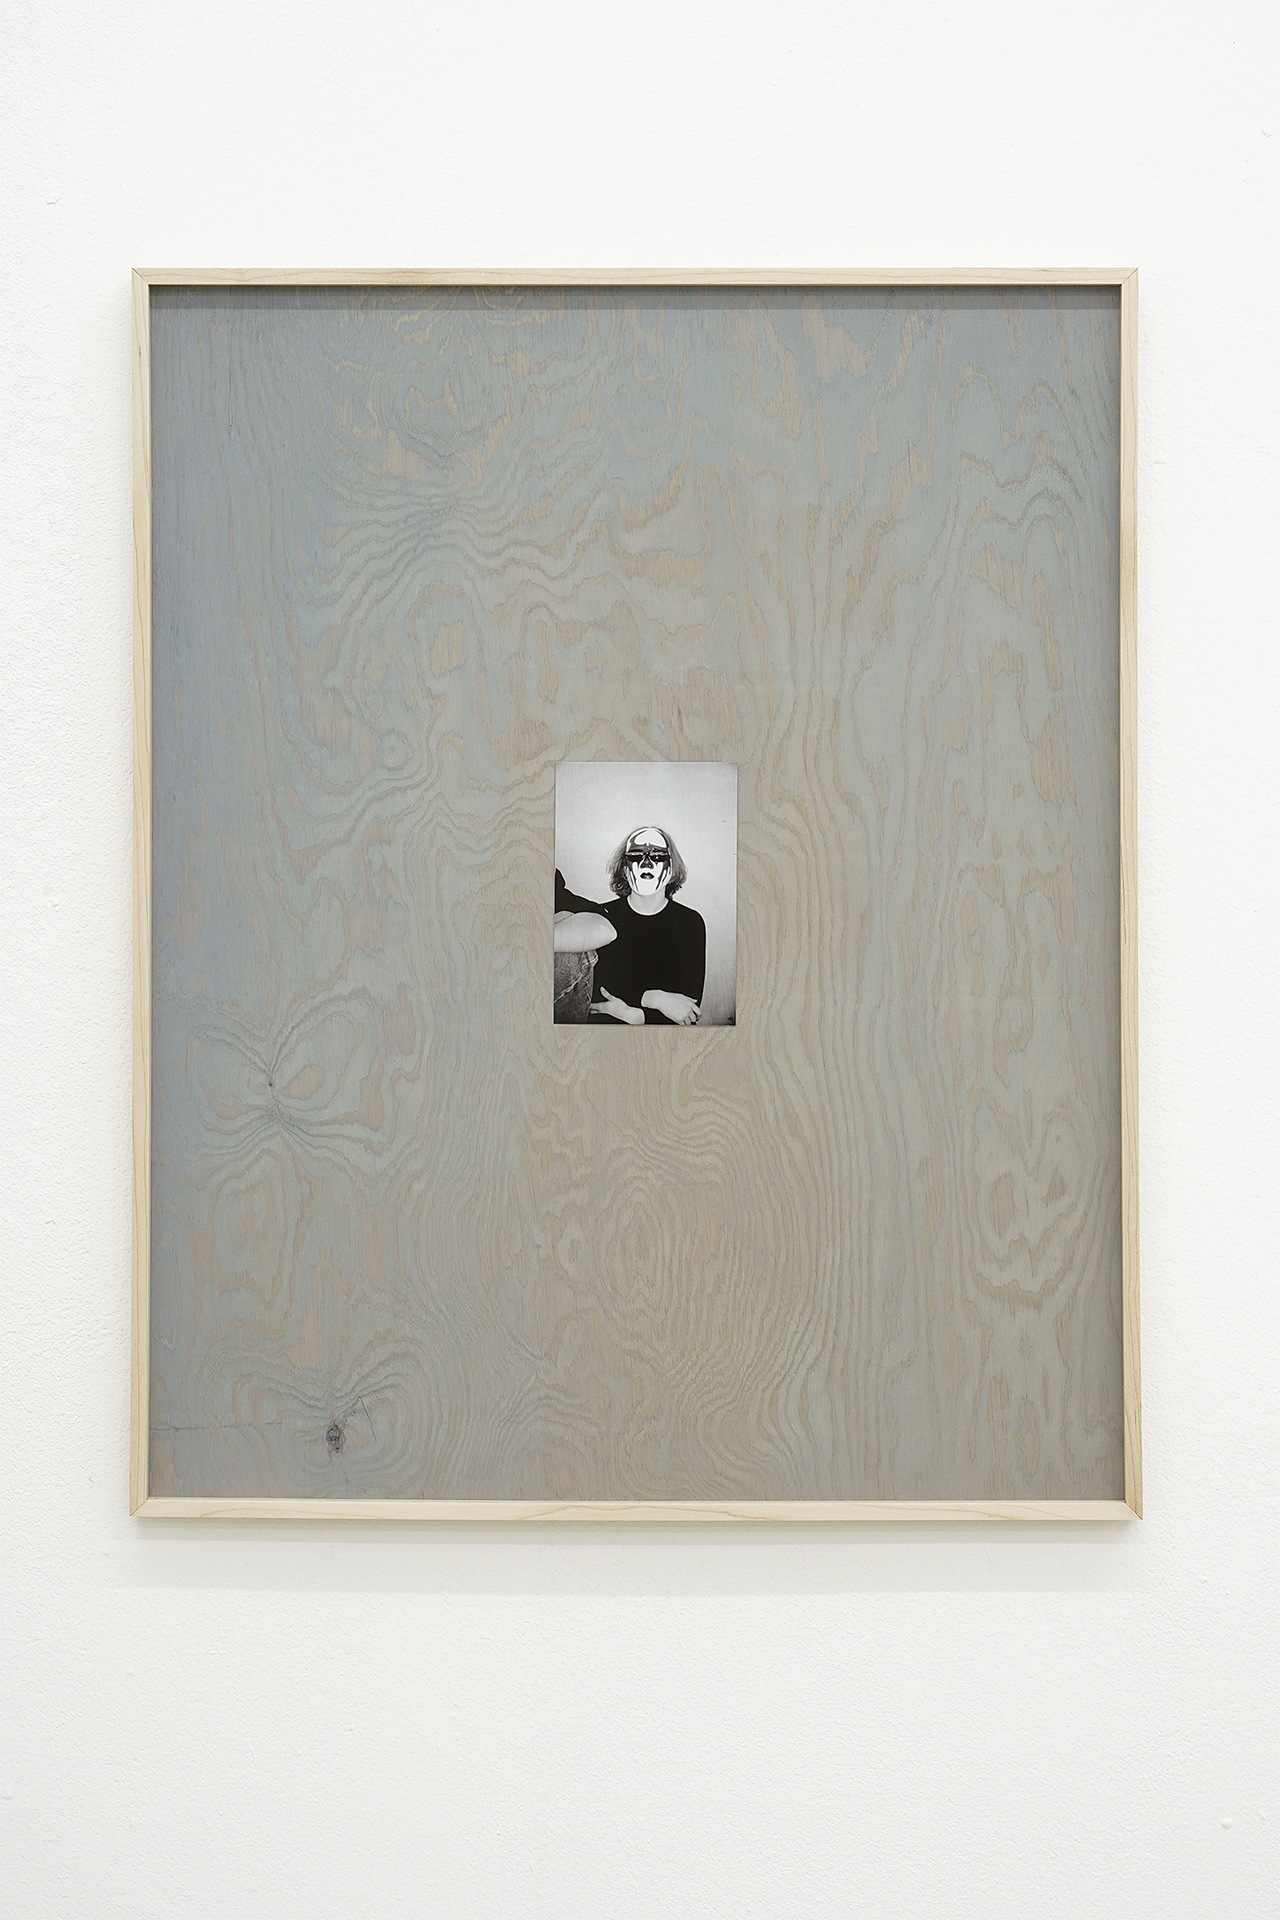 Mika Schwarz, I Am Decided, 2022, analogue b/w print (photograph ca. 2002), stained wood panel, 56 x 70 cm